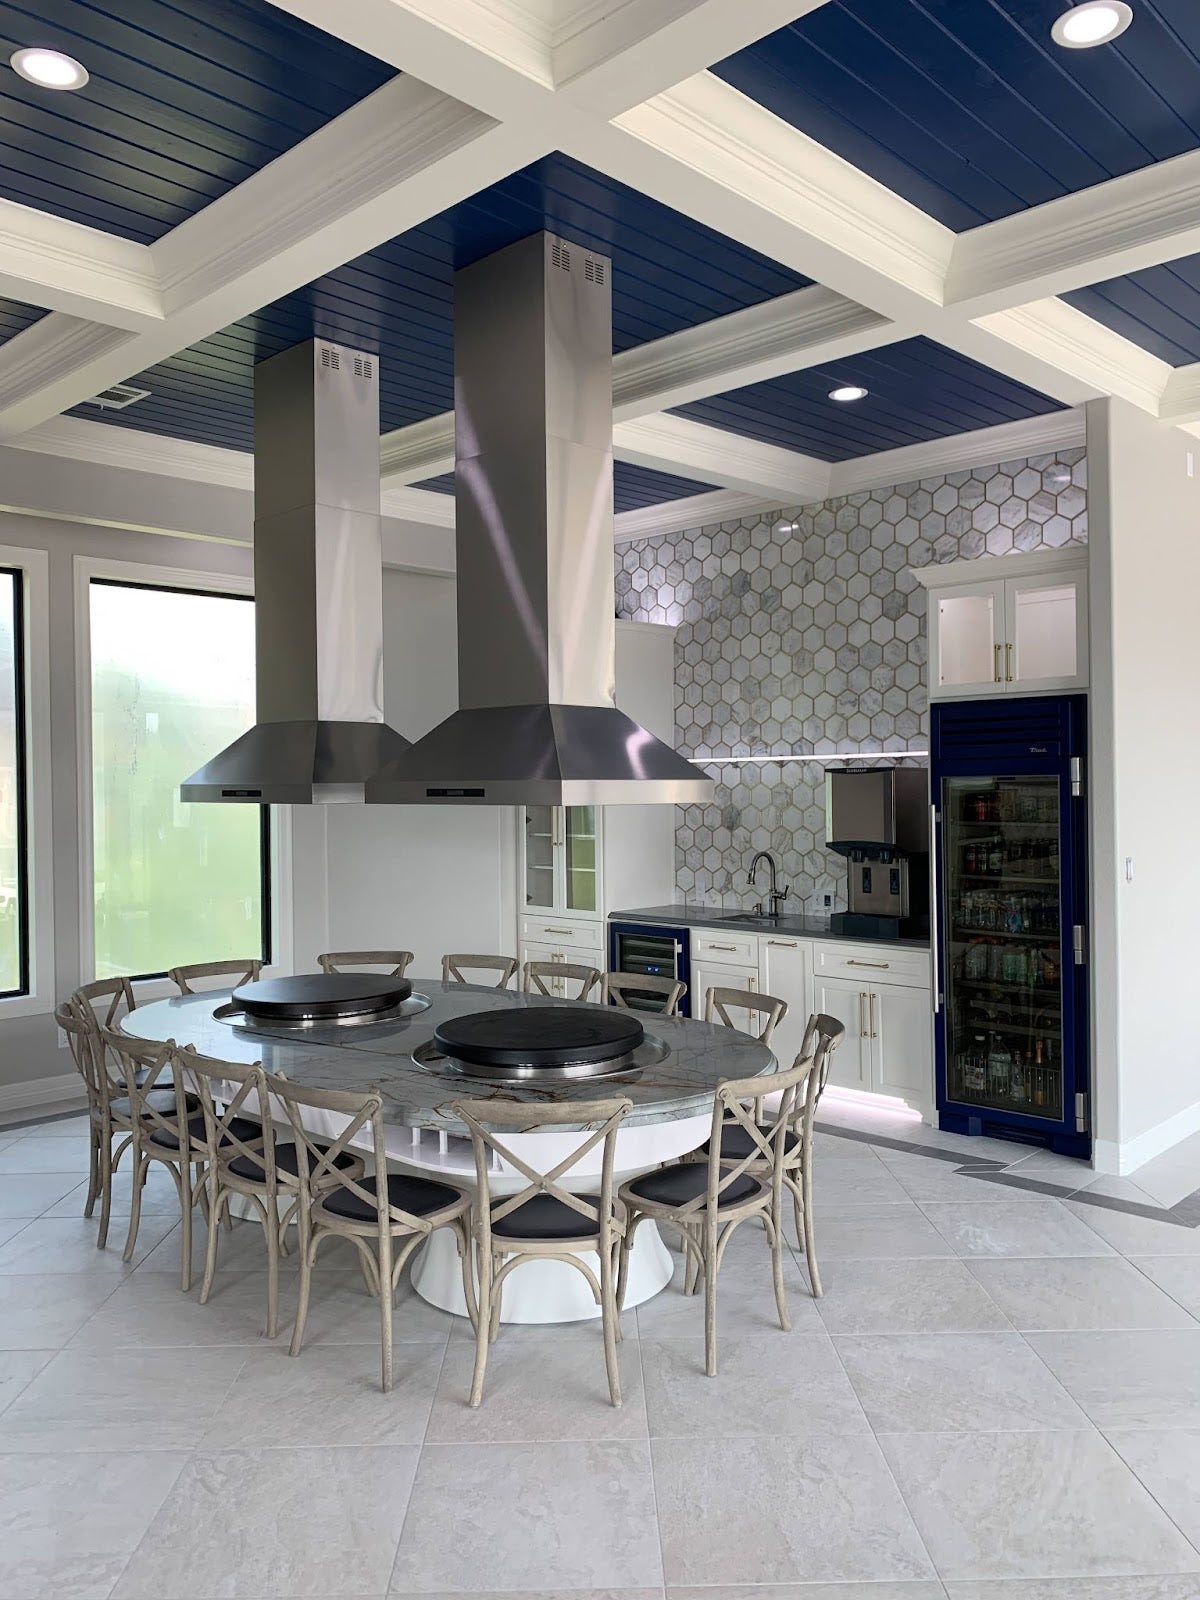 Spacious modern kitchen featuring two large extractor hoods, a central round dining table with a cooktop, and contrasting navy and white decor. - Proline Range Hoods - prolinerangehoods.com 